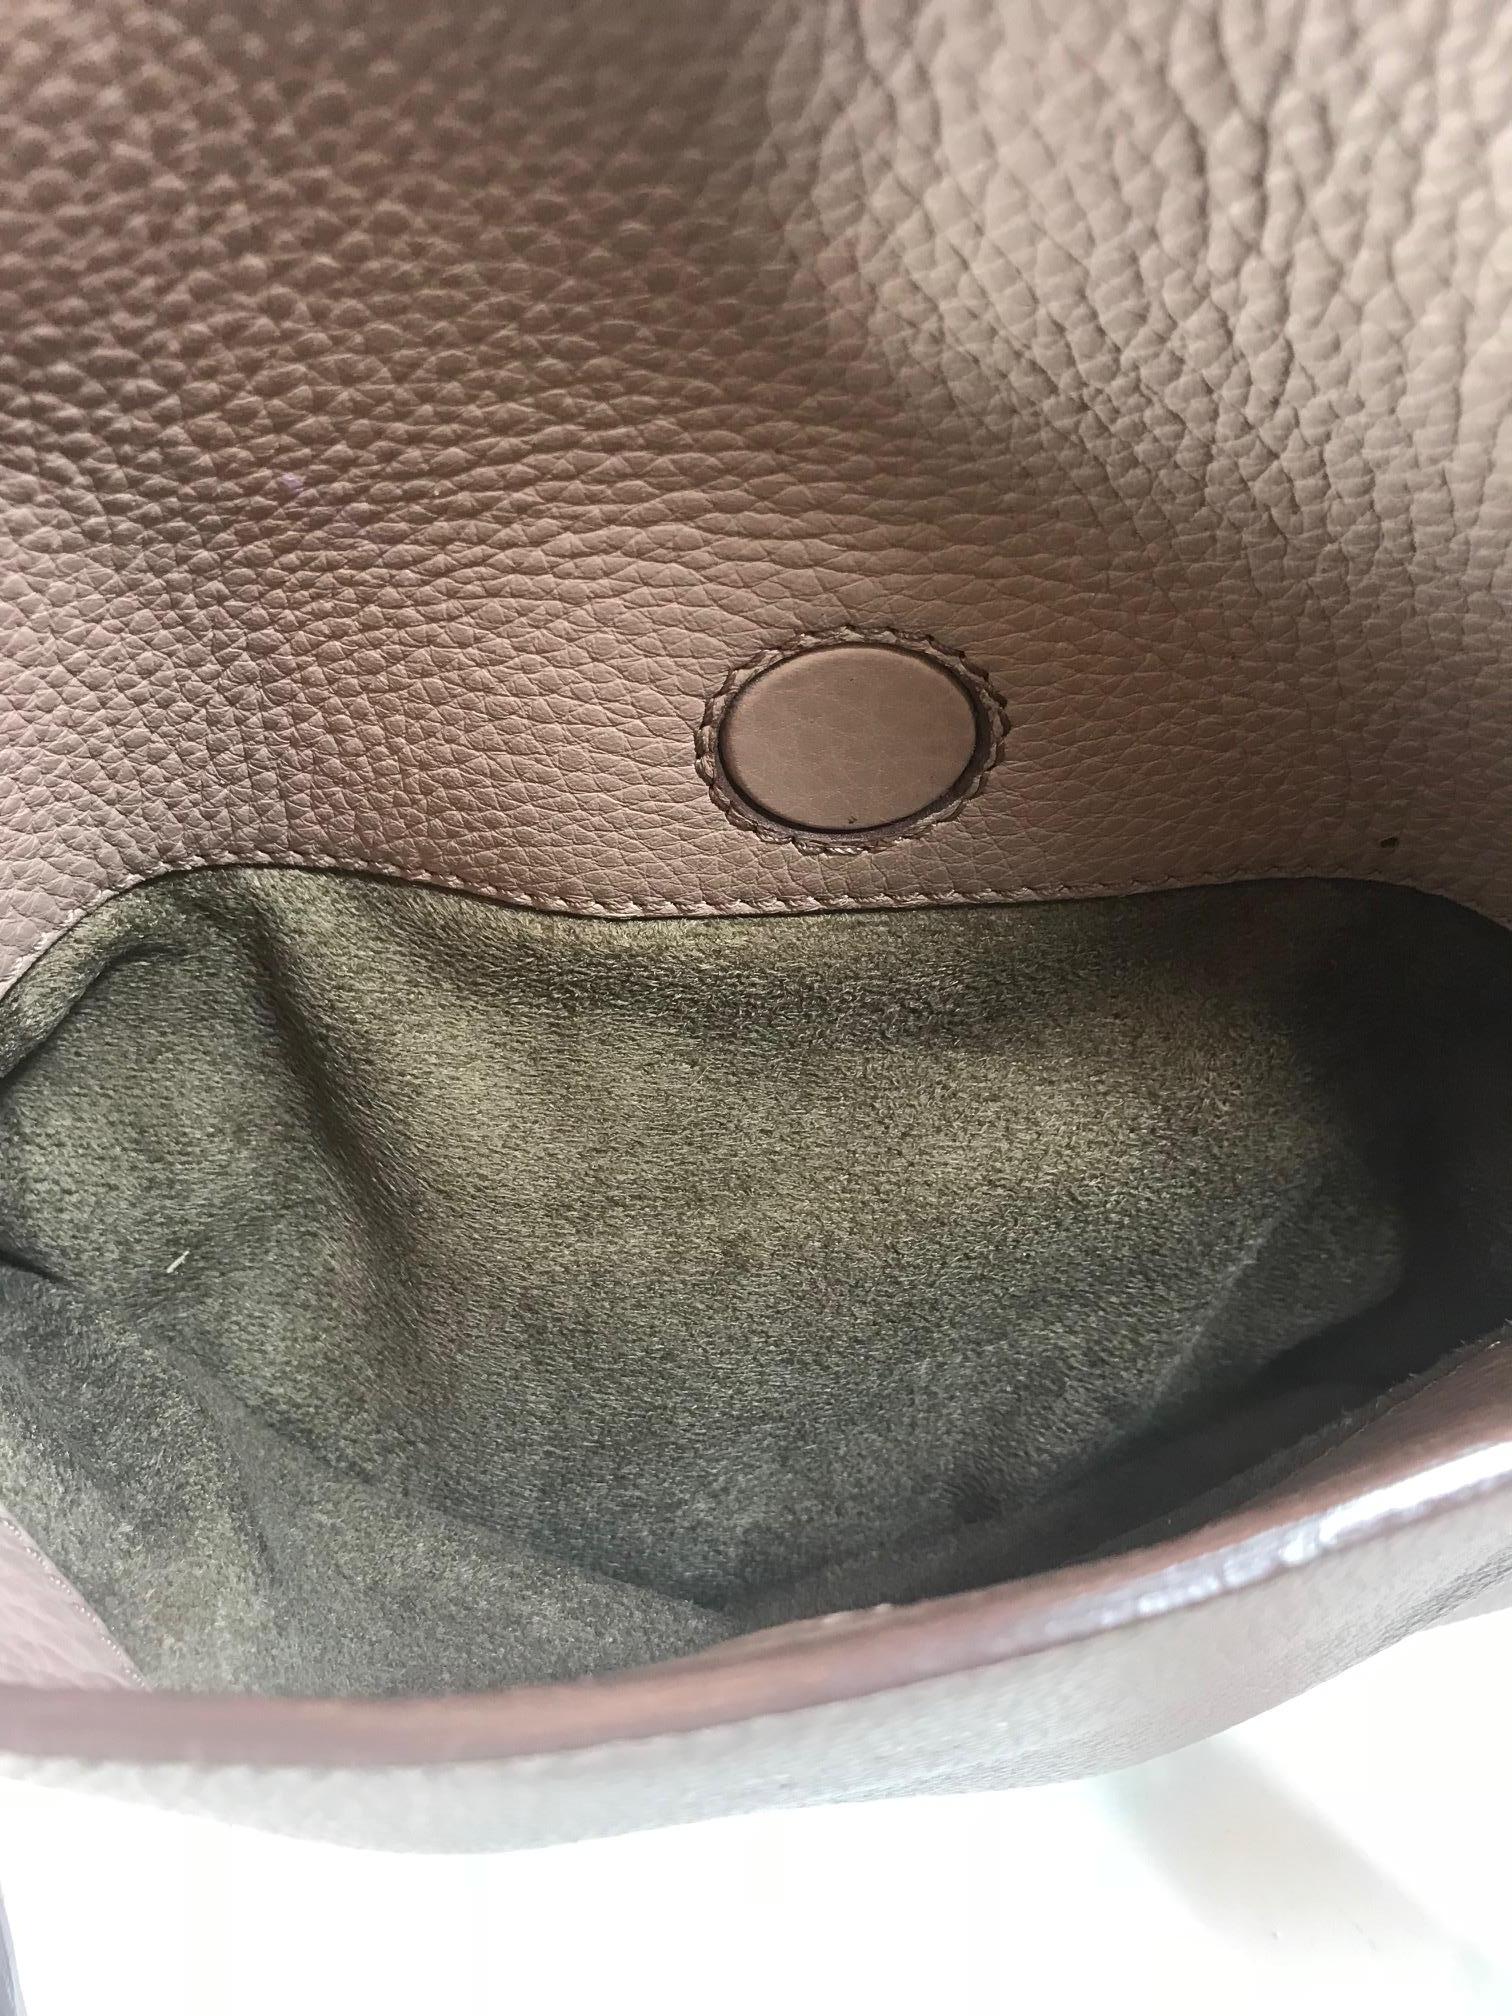 Tom Ford Grained Leather Tote For Sale 5